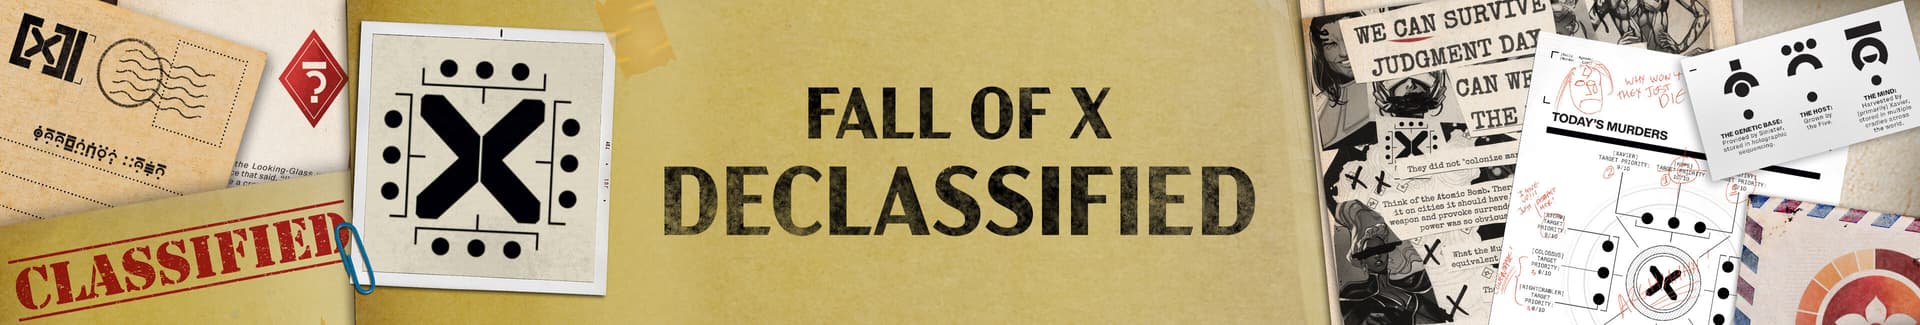 FALL OF X Declassified banner